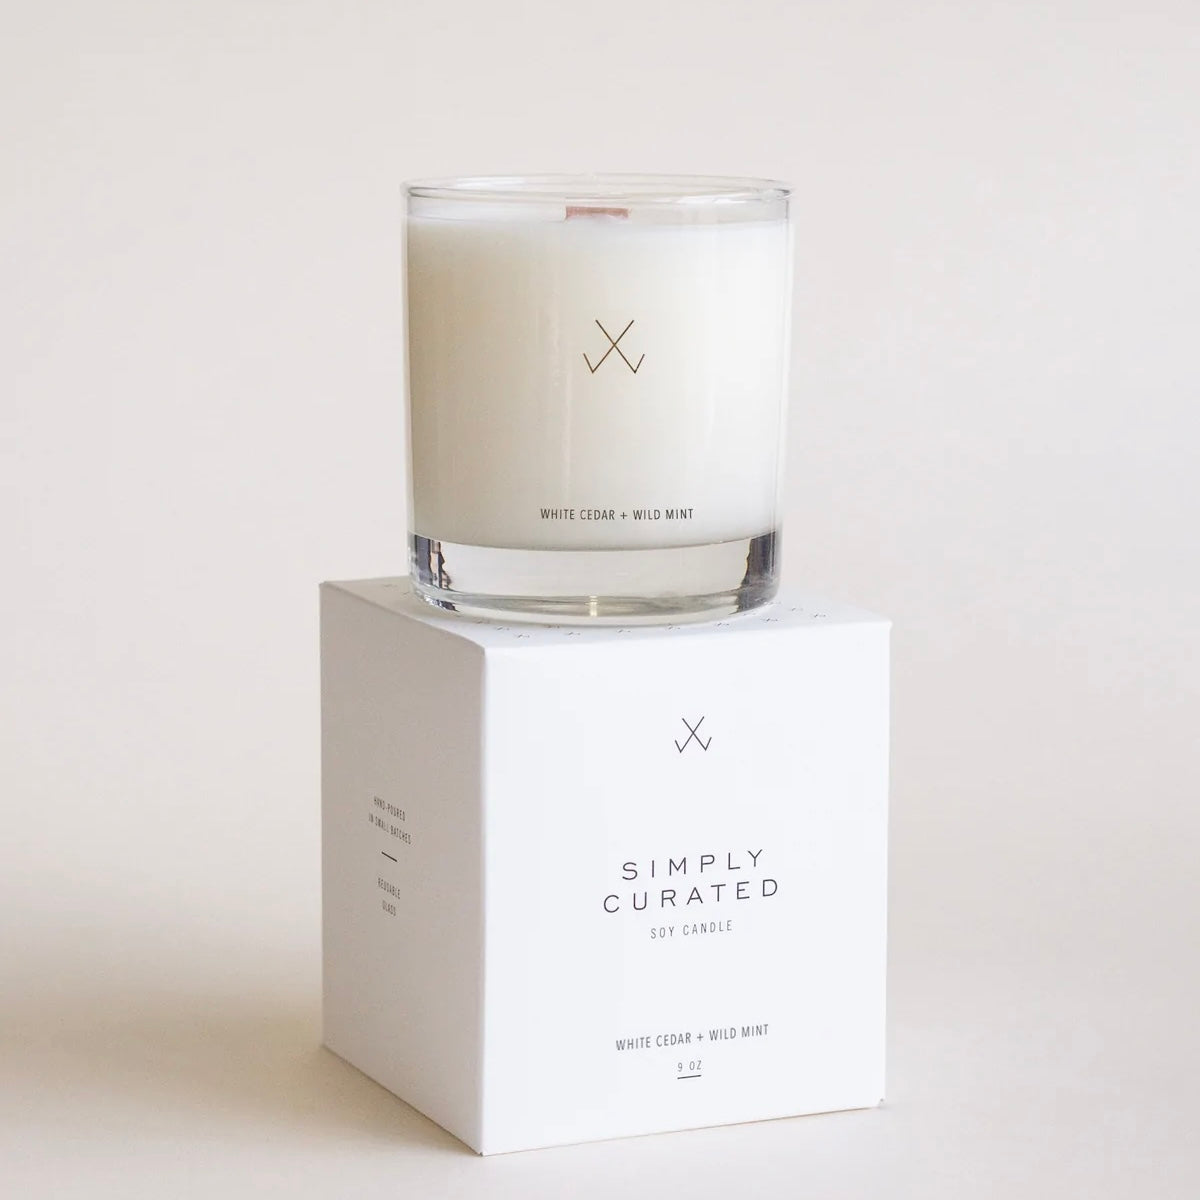 WHITE CEDAR + WILD MINT SOY CANDLE